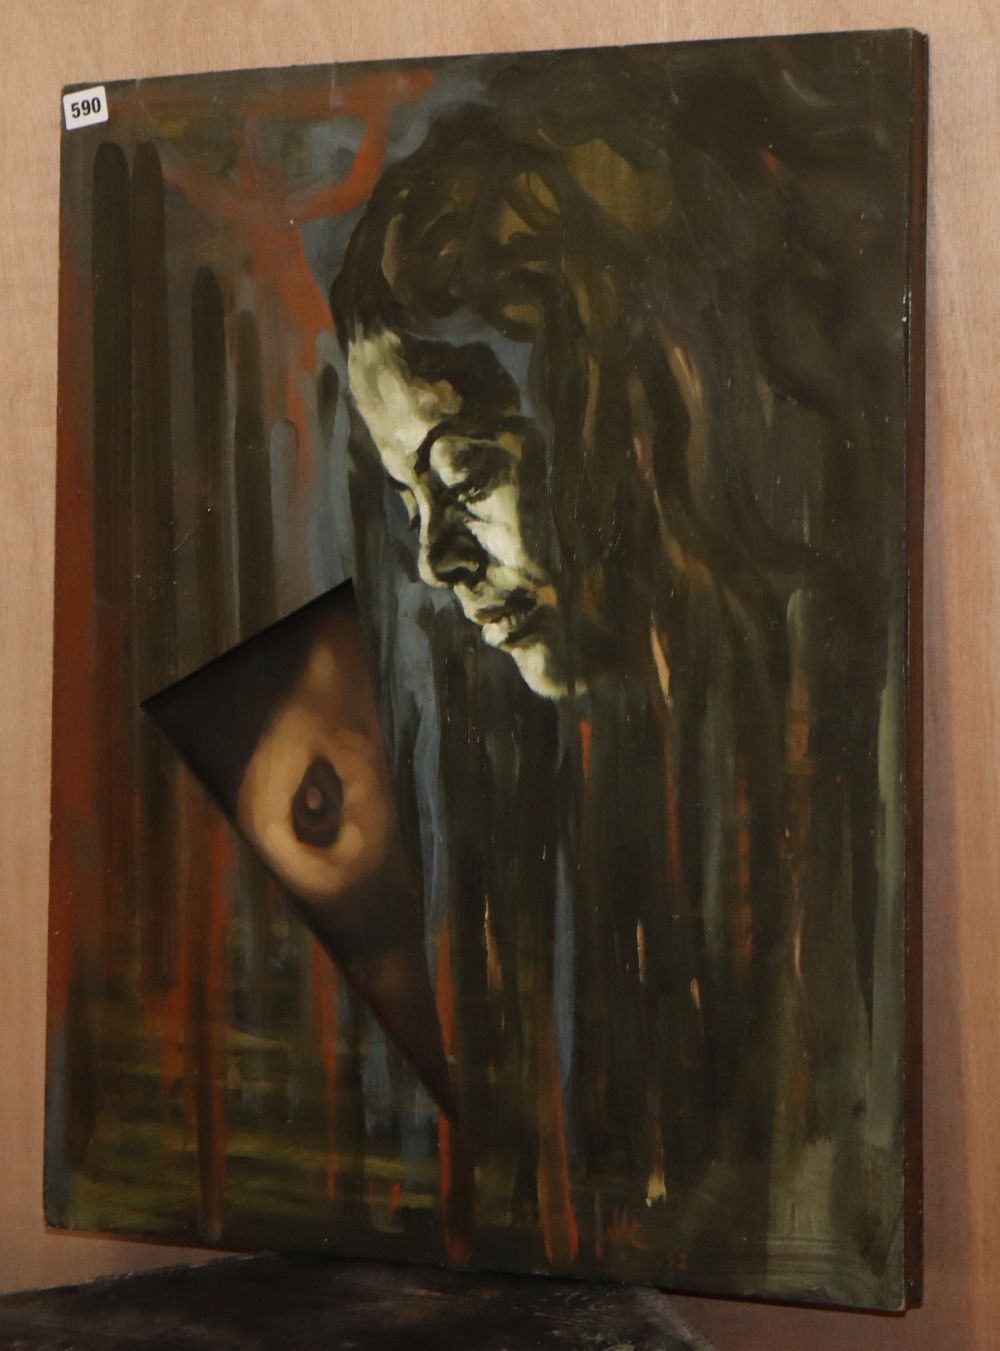 Modern British, oil on two tiers of hardboard, Face study with exposed breast, monogrammed and dated 92, 72 x 57cm, unframed